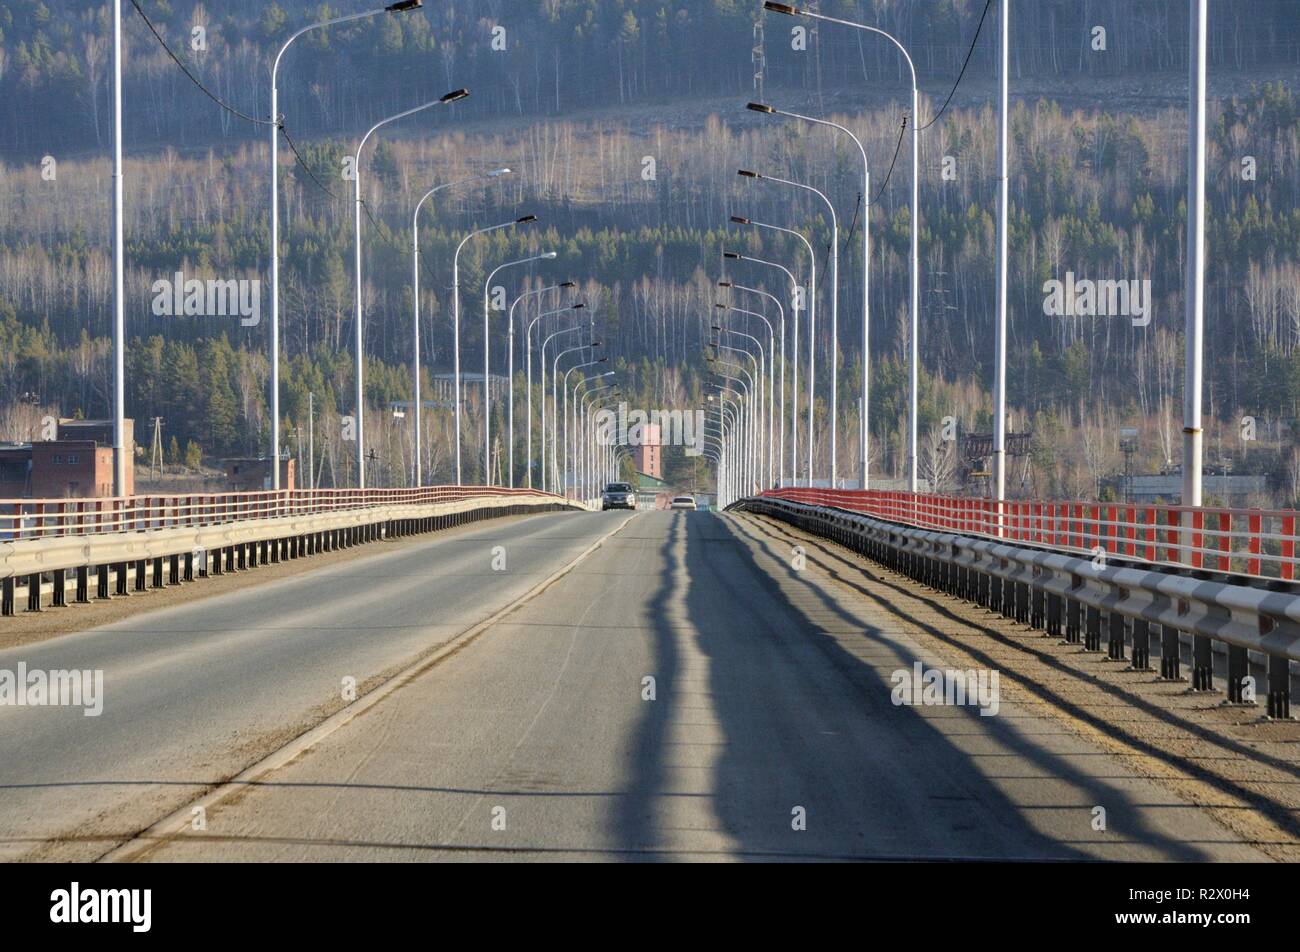 Perspective view on tarmac road on river bridge with lamp posts in Siberia, Russia Stock Photo